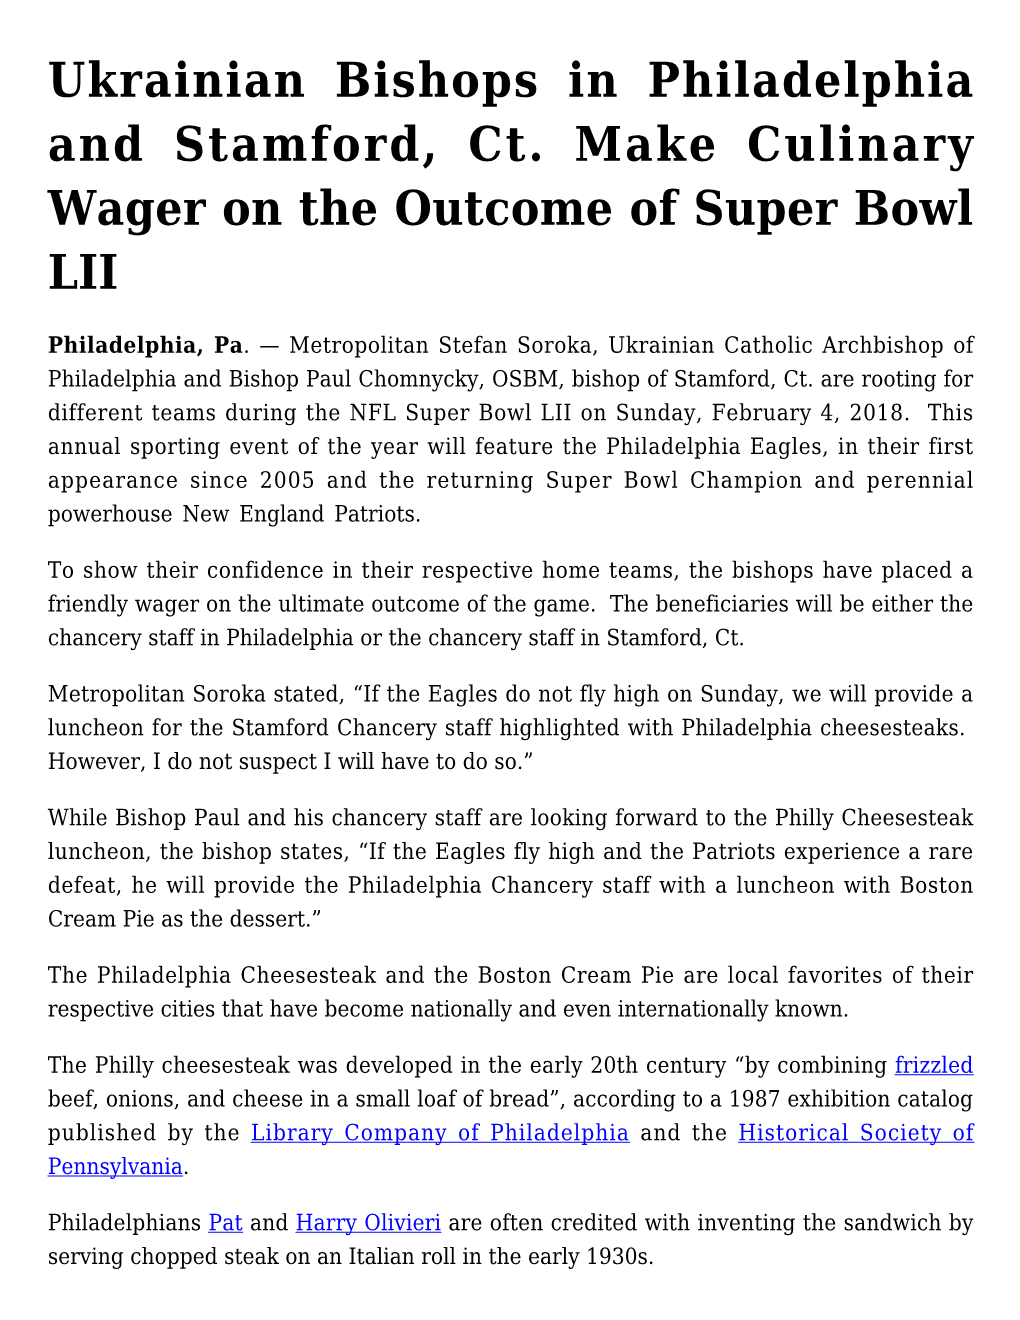 Ukrainian Bishops in Philadelphia and Stamford, Ct. Make Culinary Wager on the Outcome of Super Bowl LII